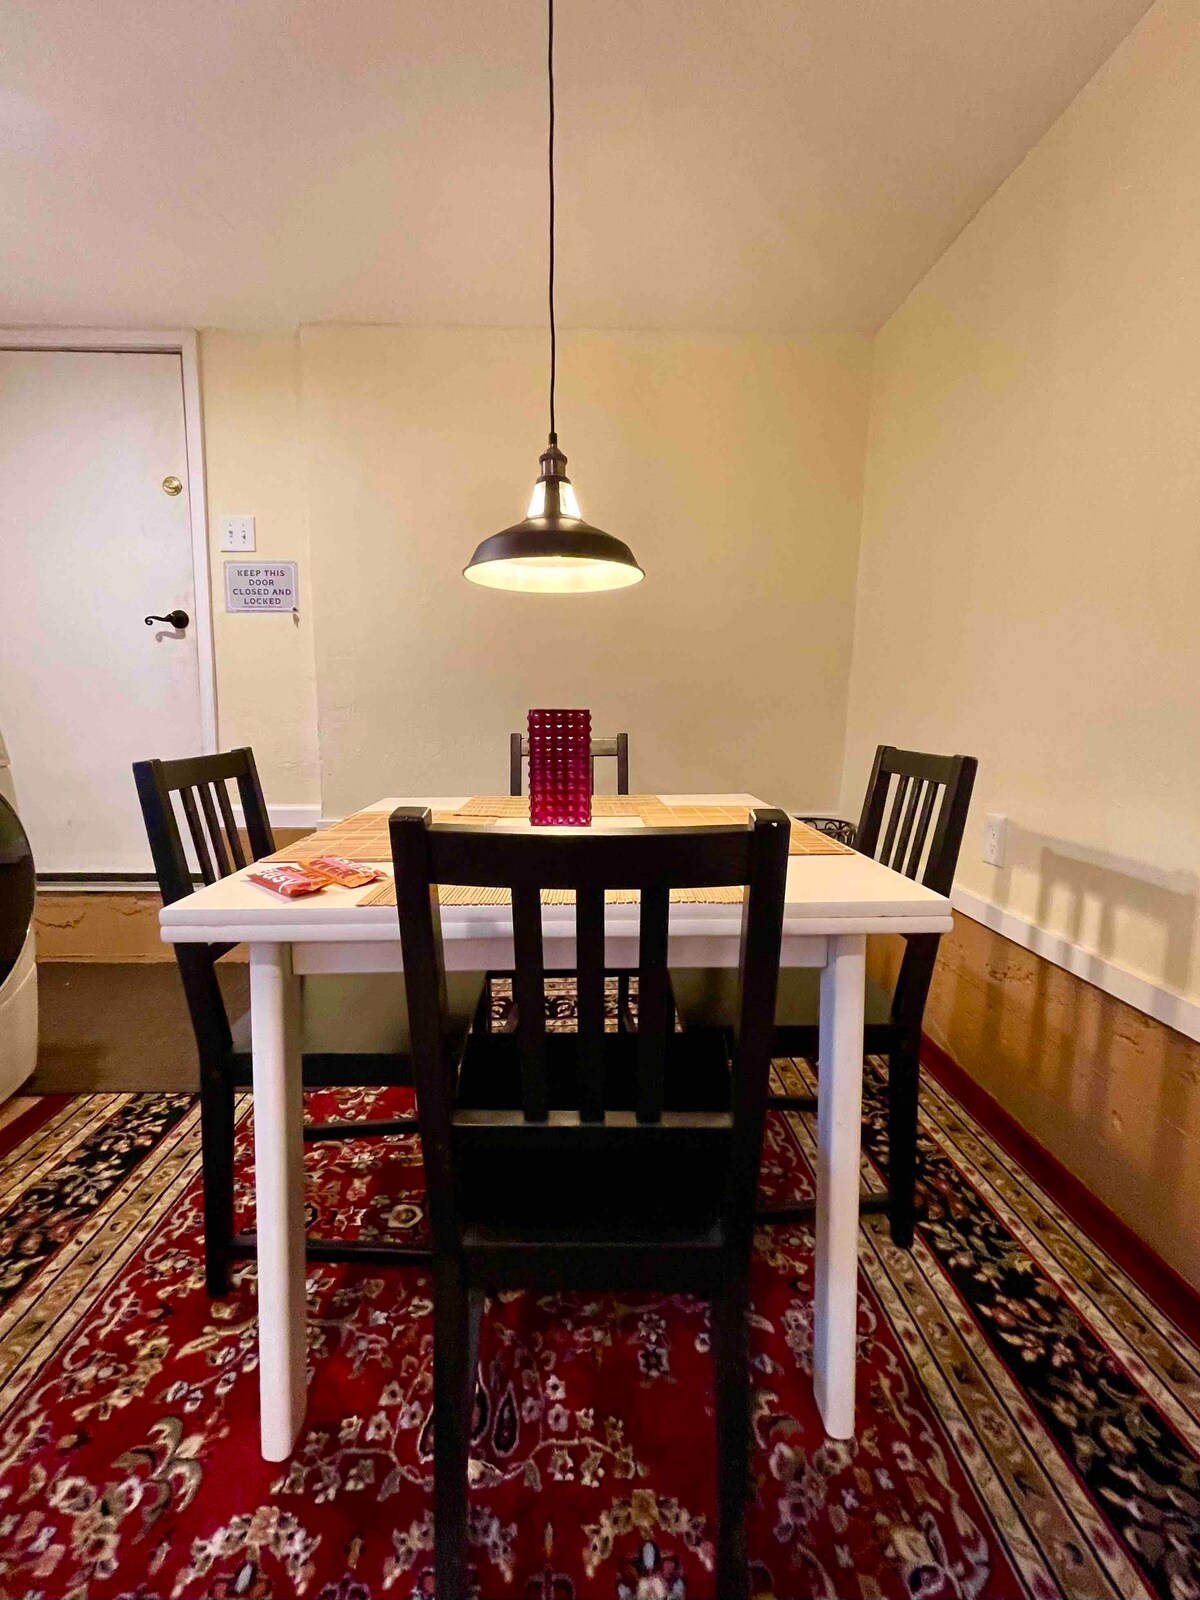 OverEasy - A Cozy Centrally-Located Apartment